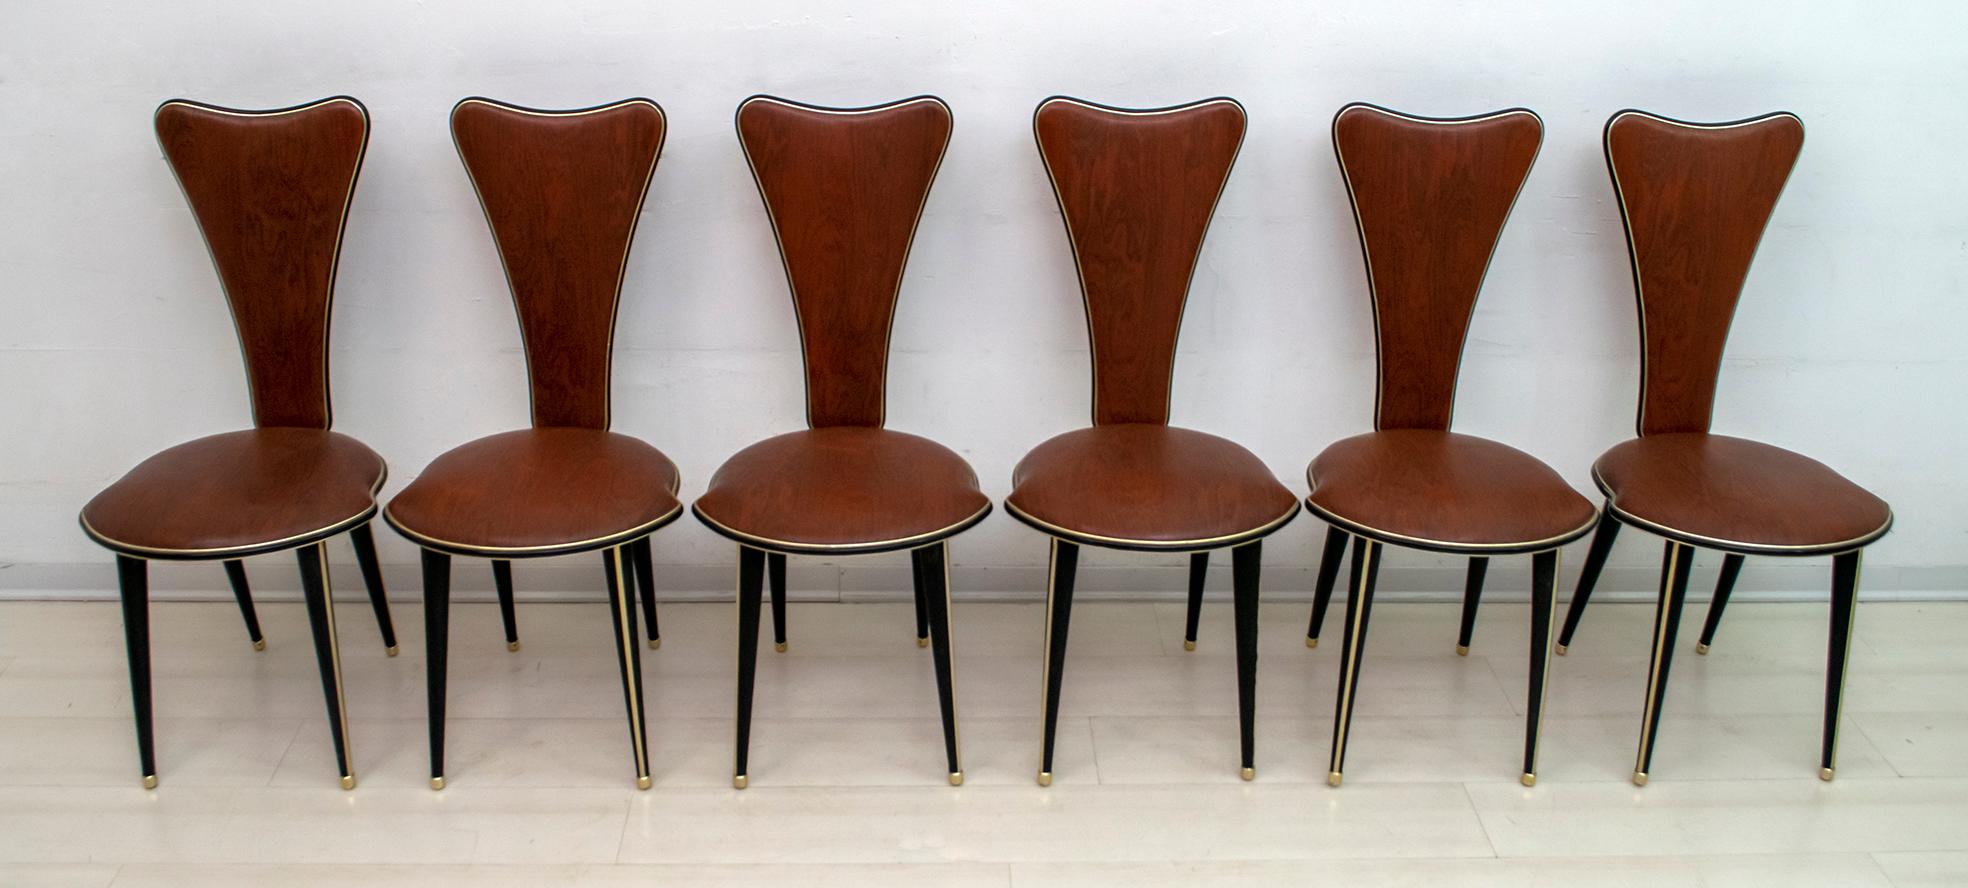 Six dining chairs designed by Umberto Mascagni of Bologna in the 1950s. The main body structure is in solid European wood, covered in brown veined vinyl and anodized aluminum. The legs are also covered in black vinyl. Excellent vintage condition.